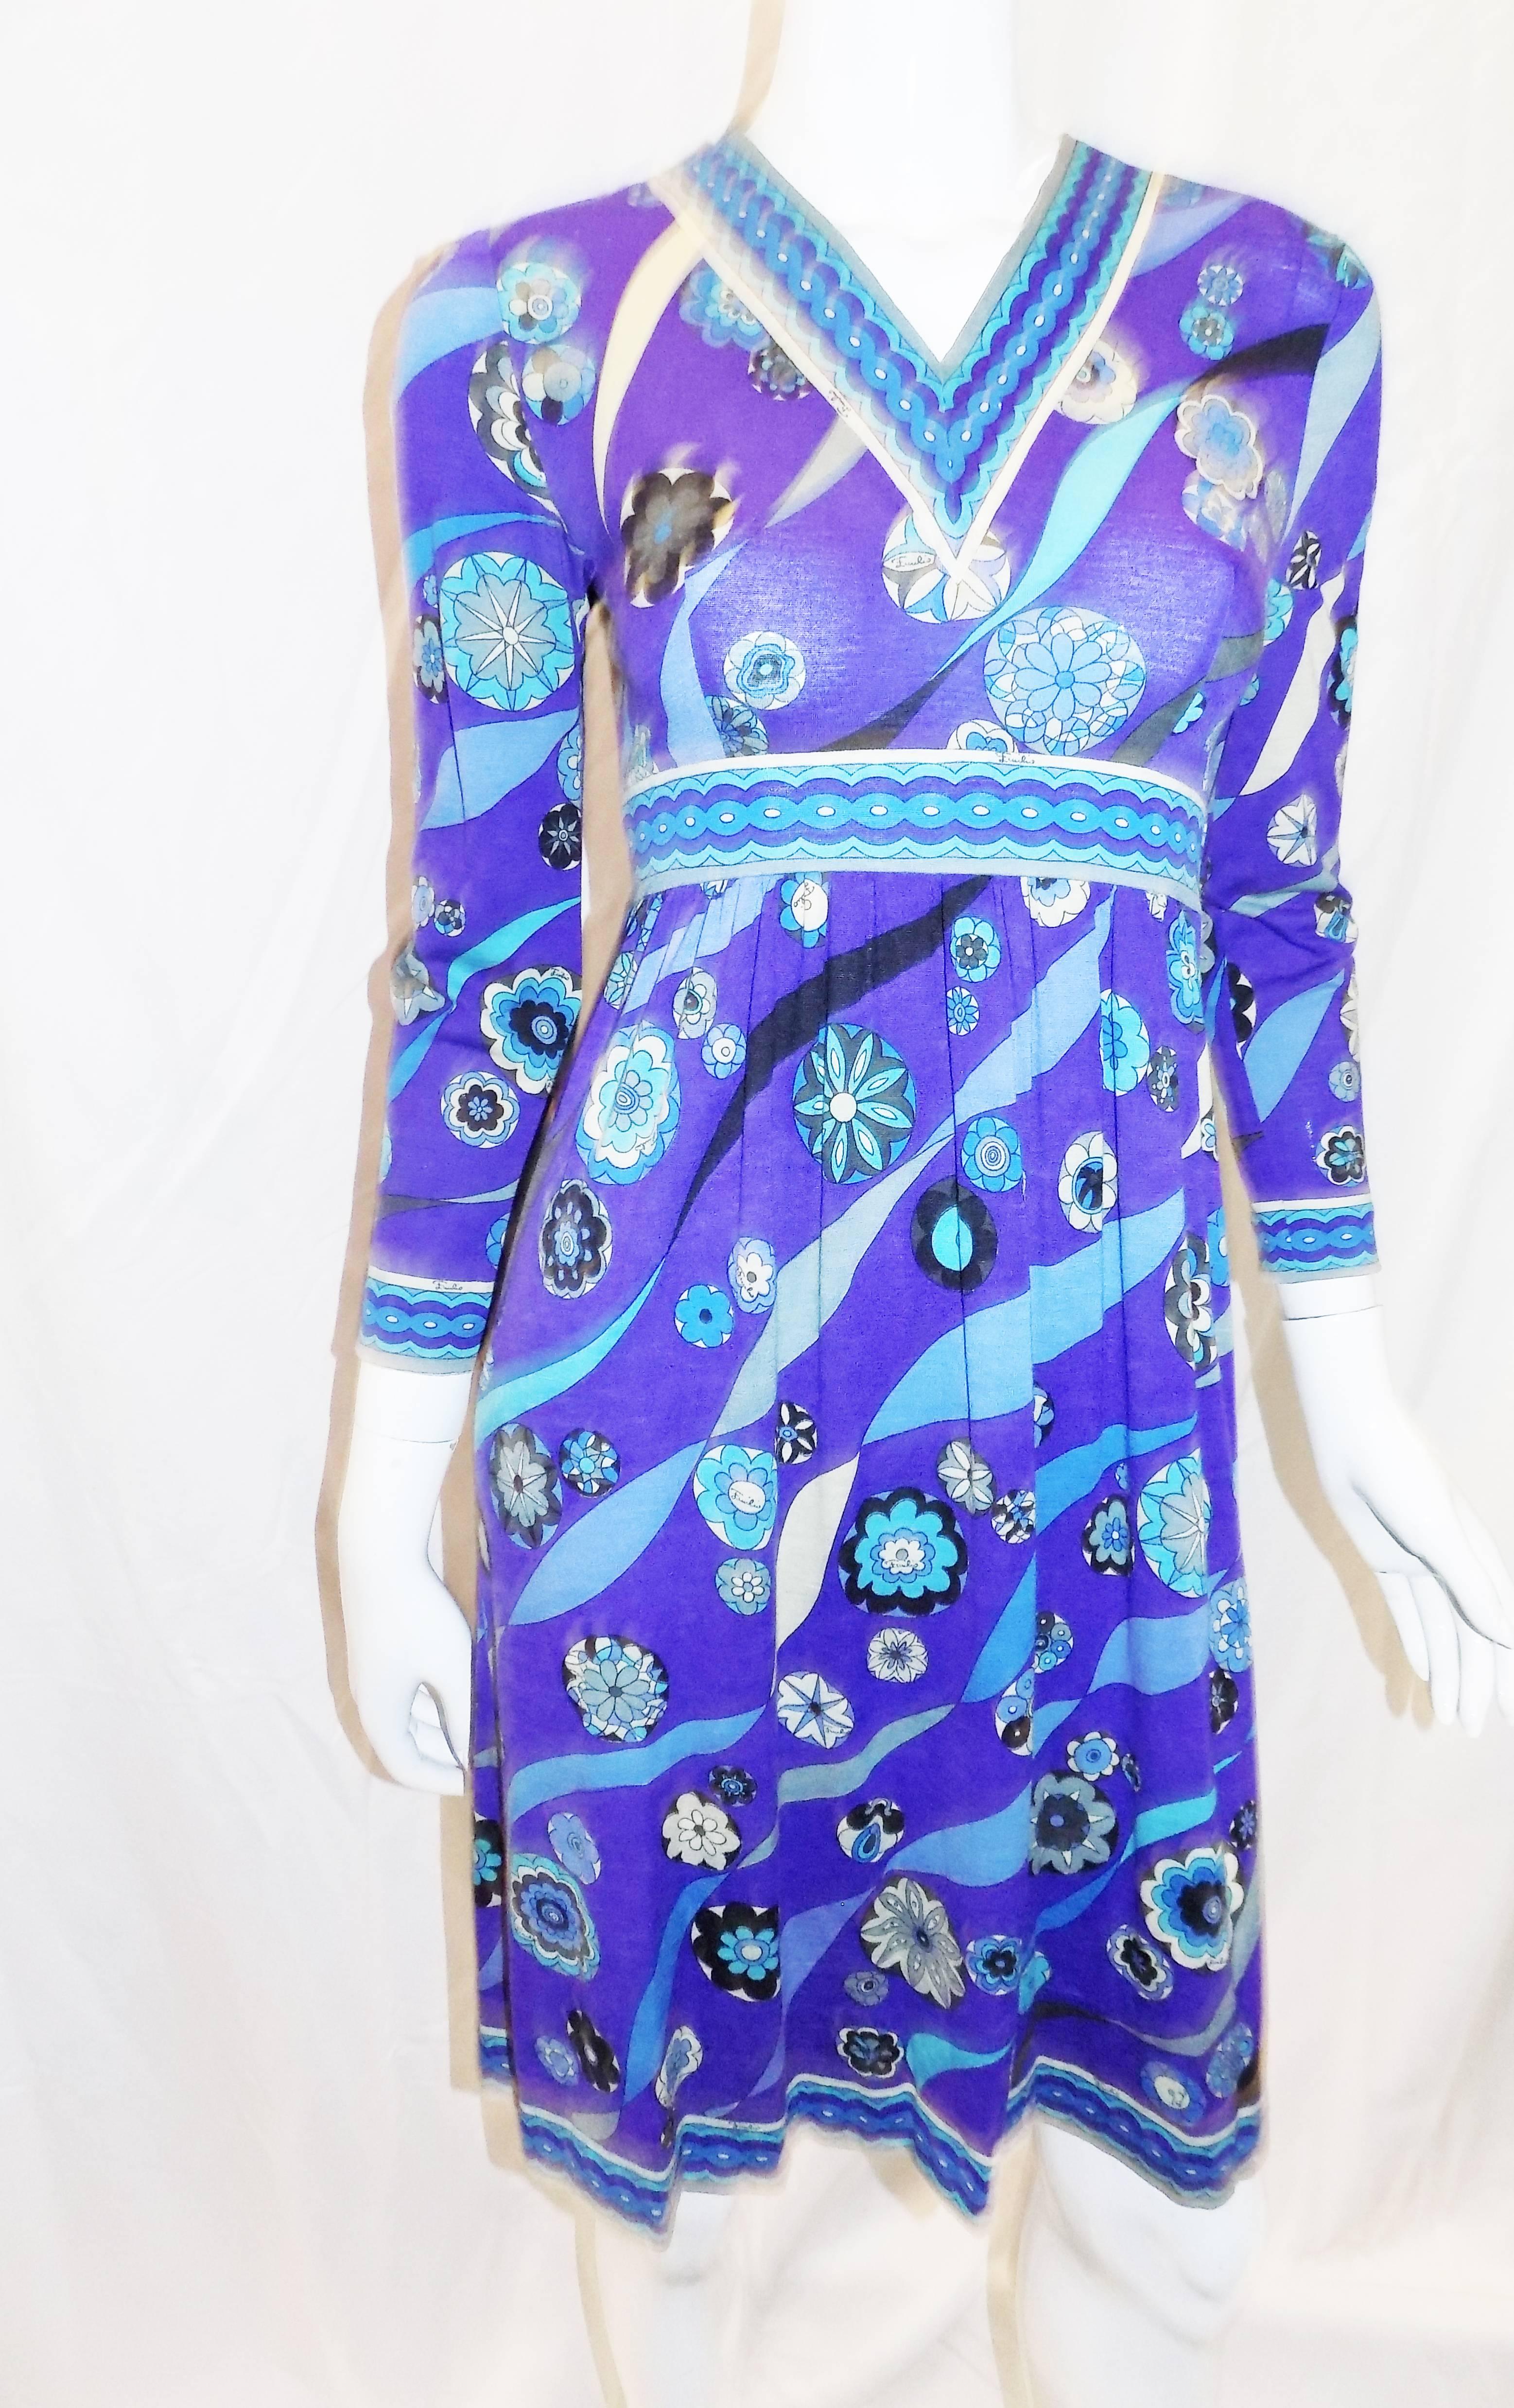 Beautiful vintage PUCCI blue print empire cut  wool and silk dress 1970. Very light blend of wool and silk in vivid blue tones and stunning print. Empire style. V neck collar. Zipper back and side closure. Pristine condition. Perfect fall, winter